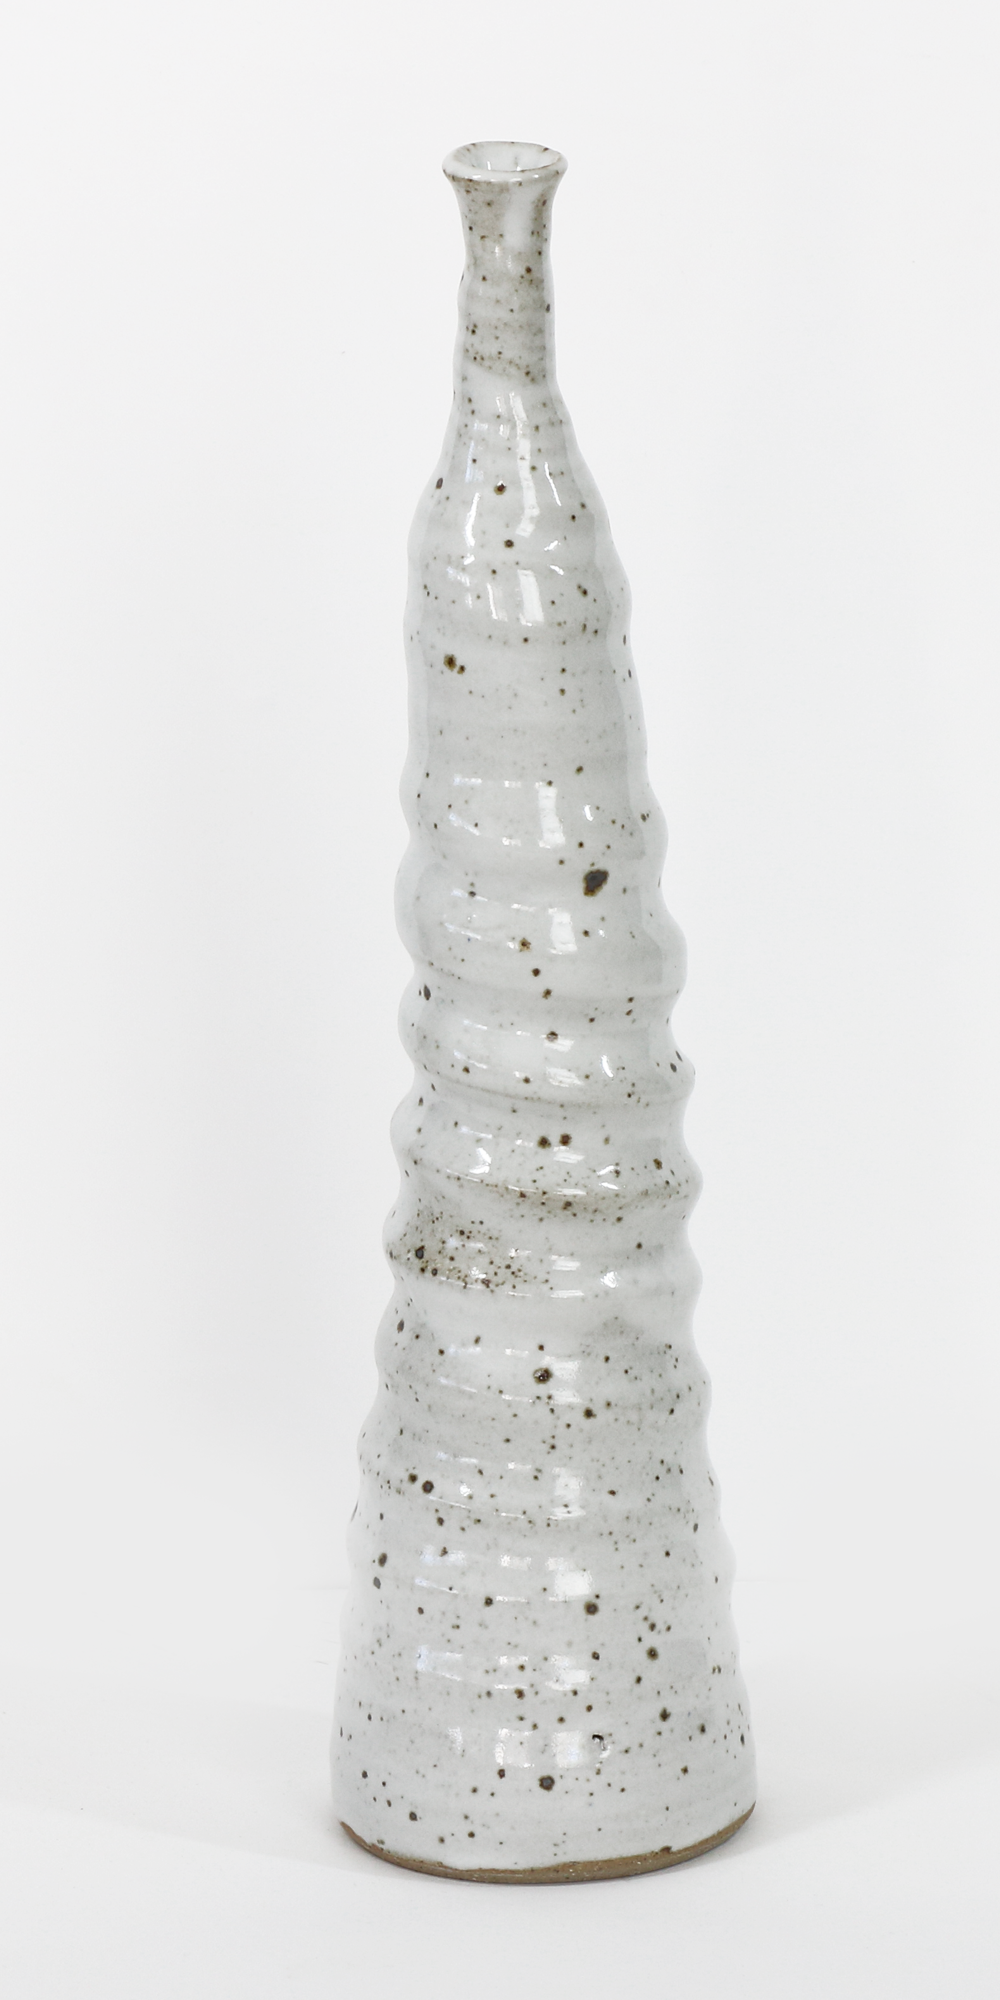 Happiness Vase #3 Ceramics Jacqueline Kampen The Happiness project